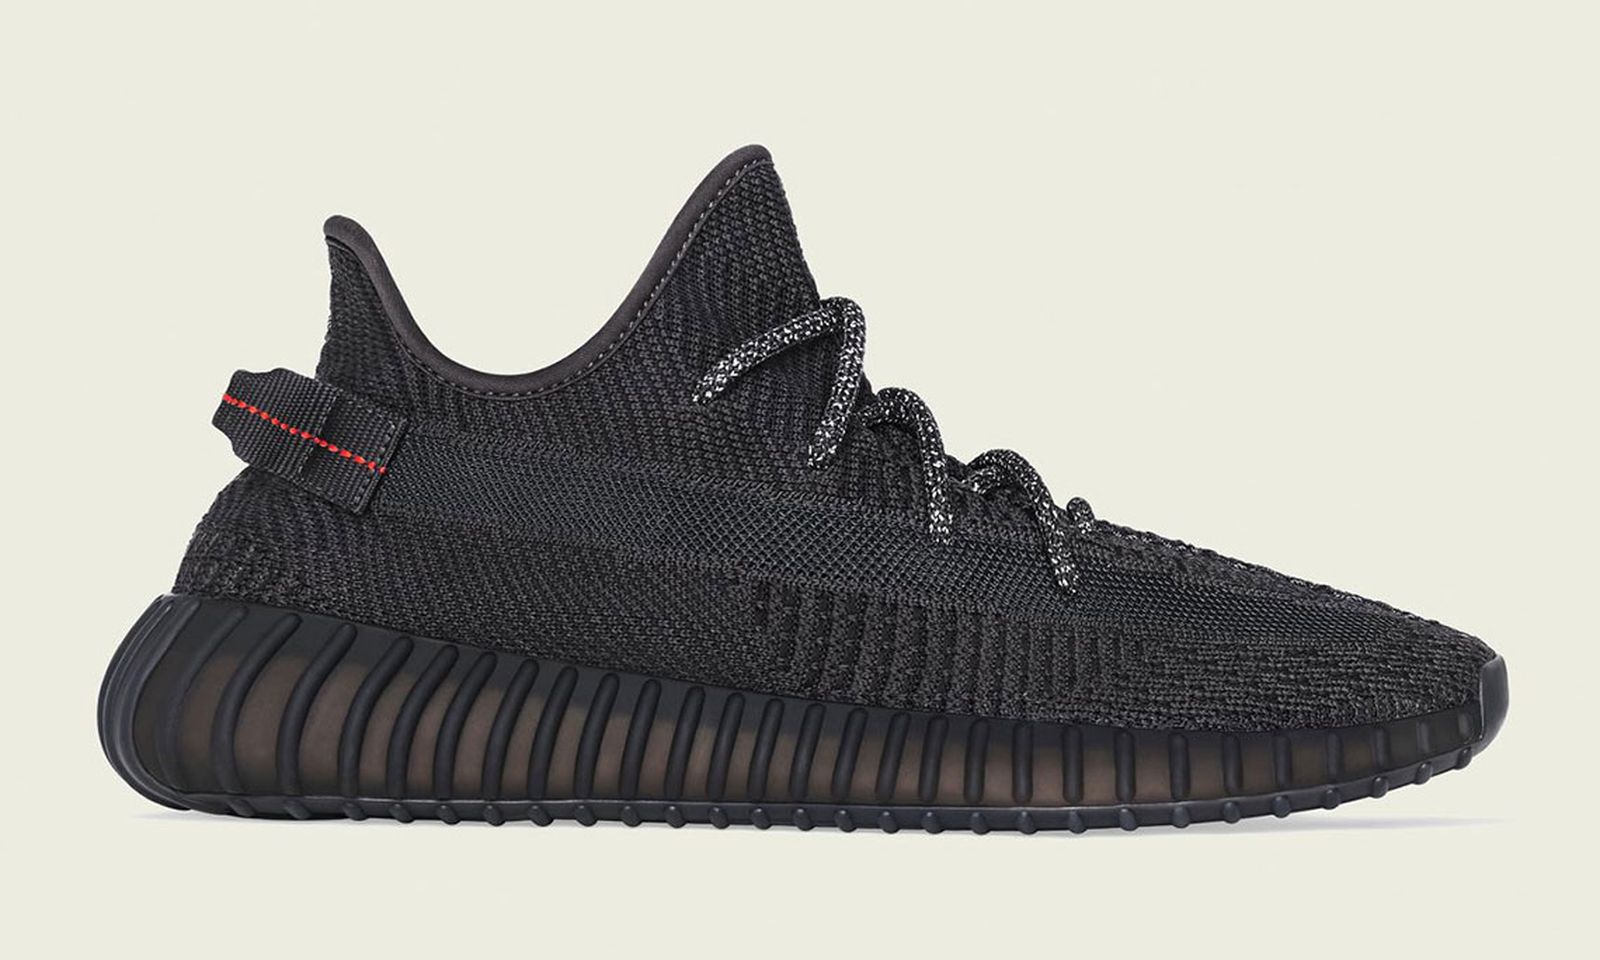 The adidas YEEZY 350 V2 "Black Is Now at StockX